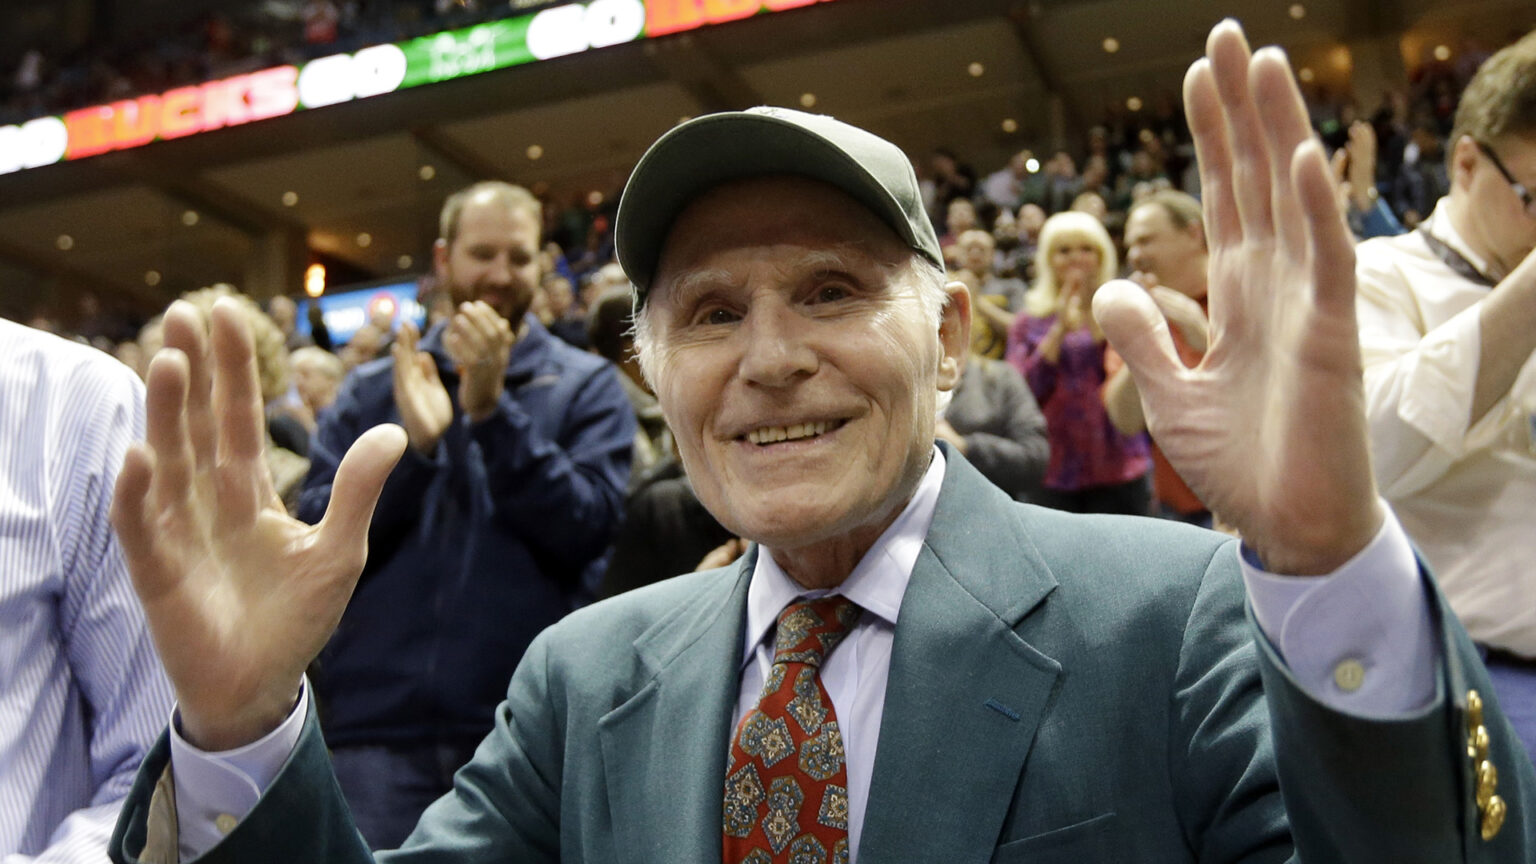 Herb Kohl holds both hands up in the air while standing in the bleachers of an arena, with people standing behind him at progressively higher levels applauding and cheering.